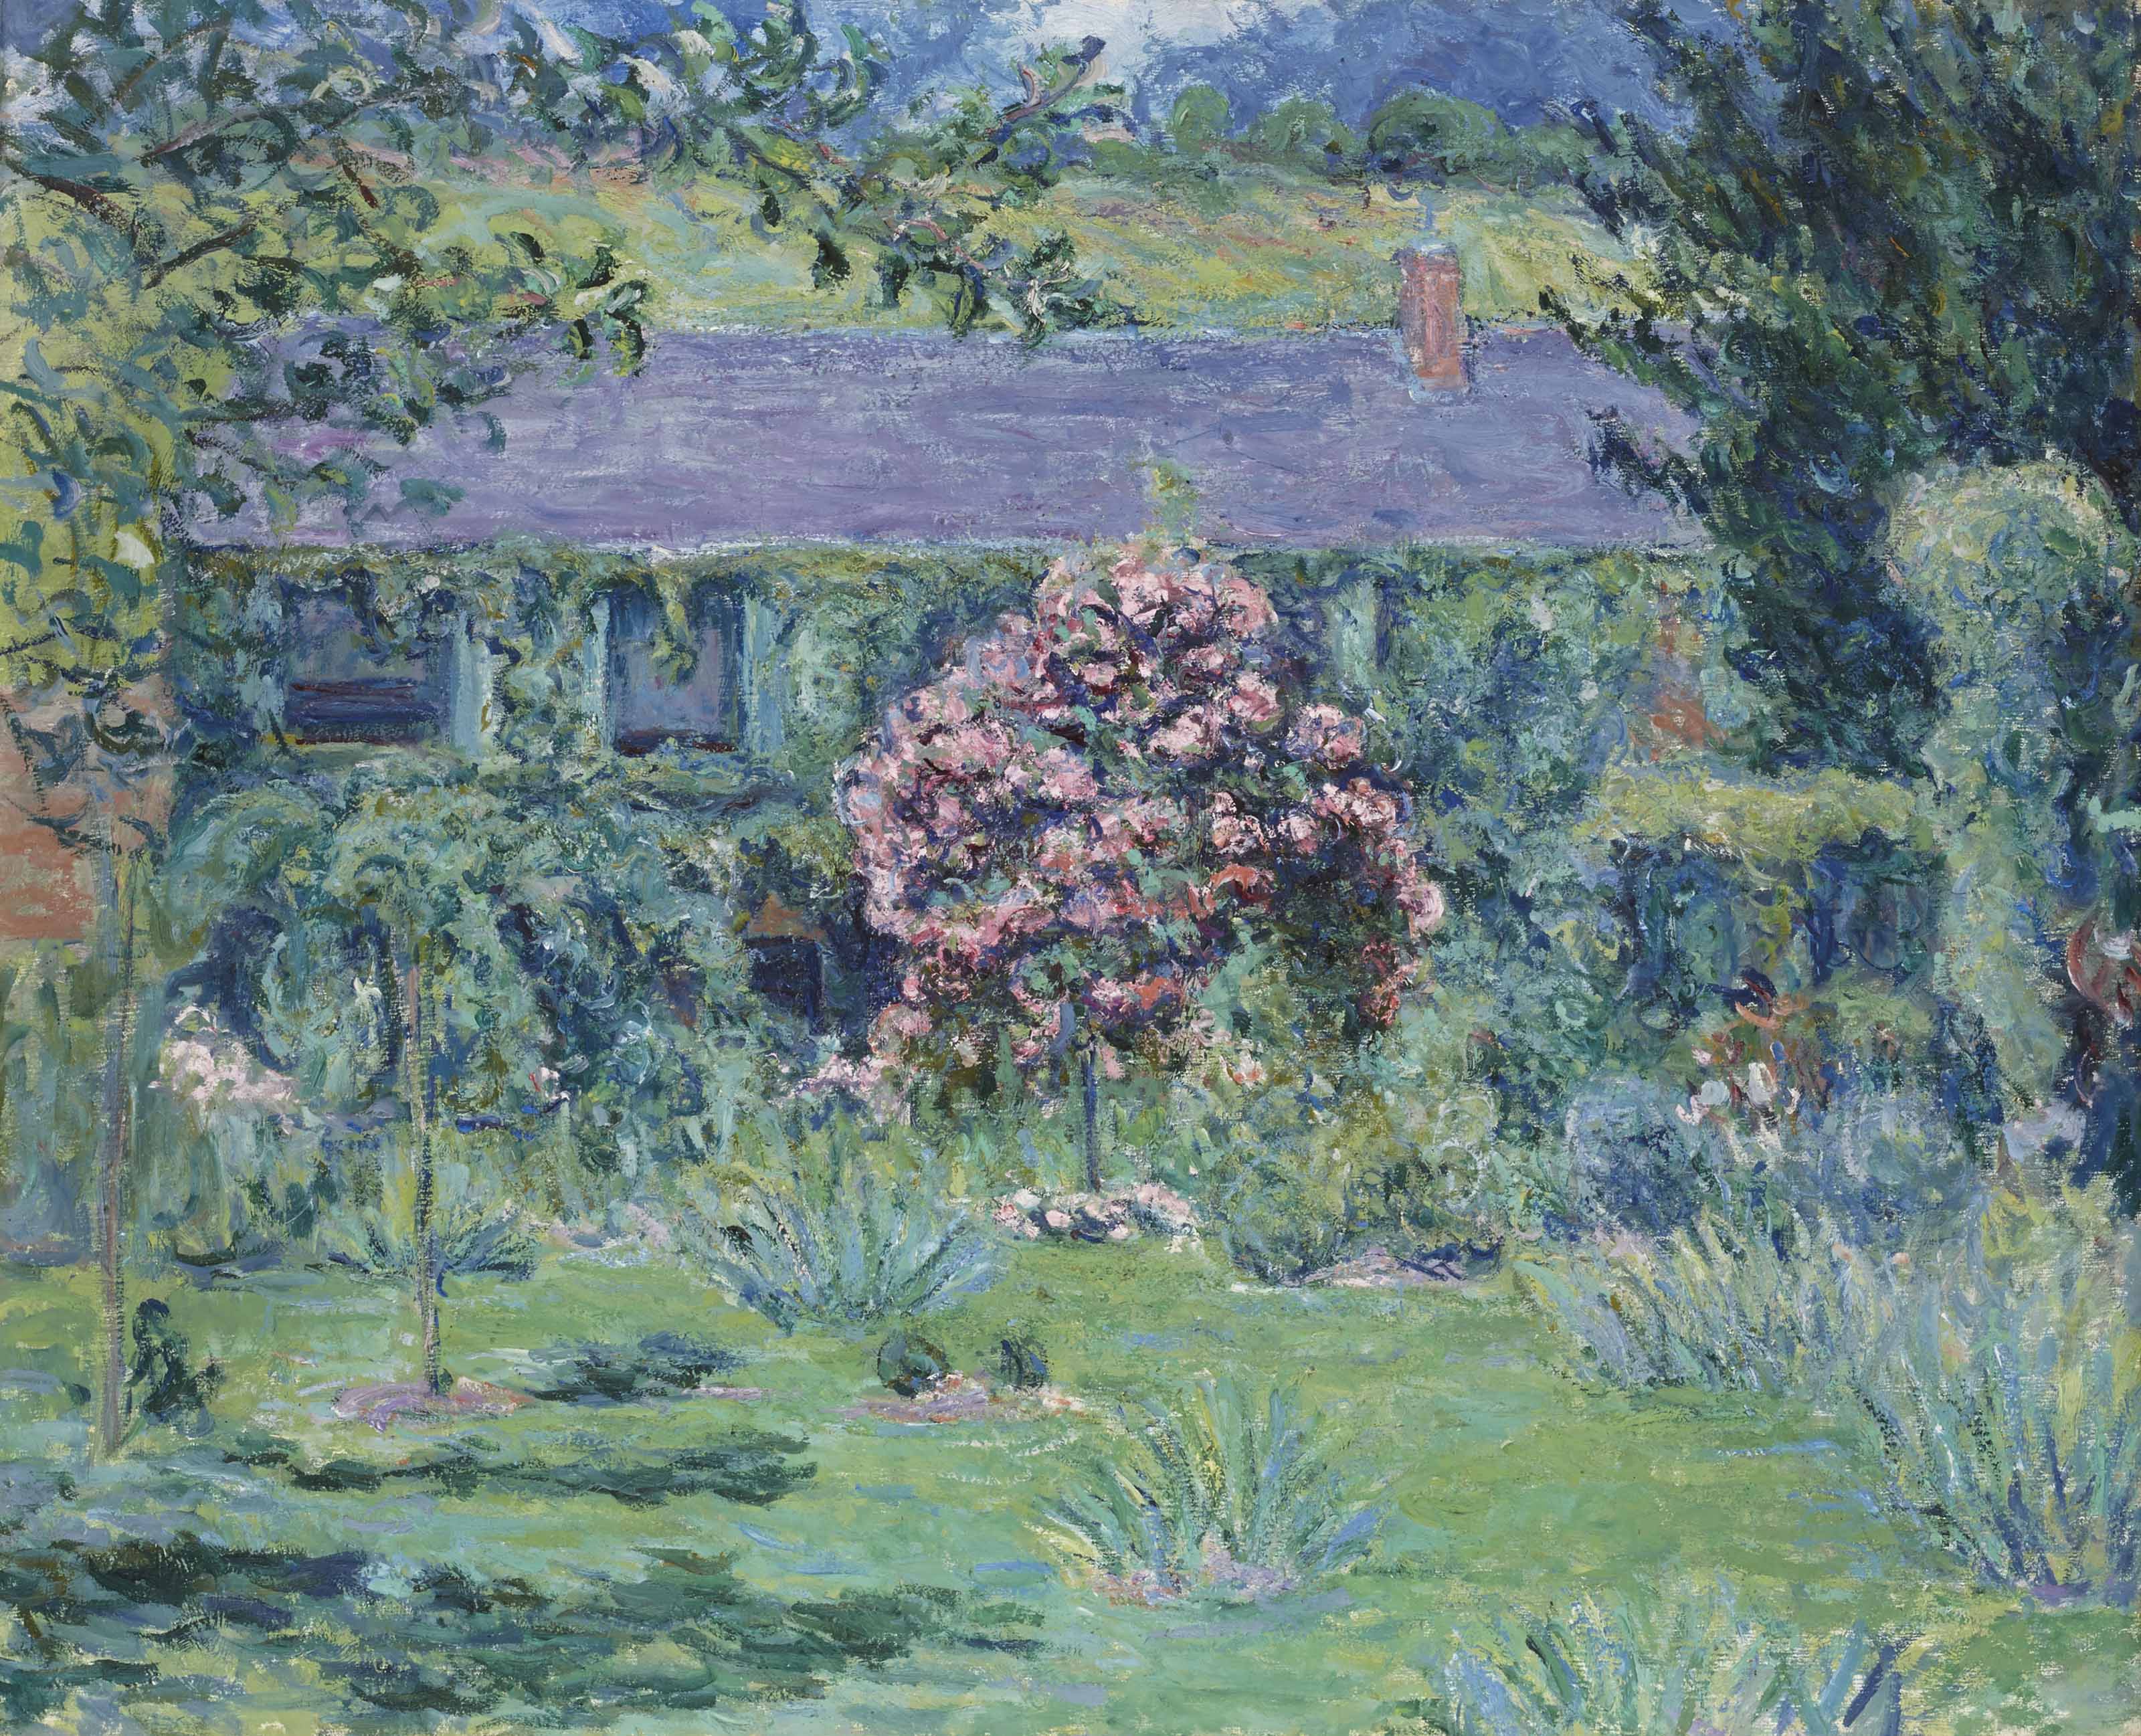 Monet's House in Giverny by Blanche Hoschedé Monet - 59.4 x 72.8 cm private collection